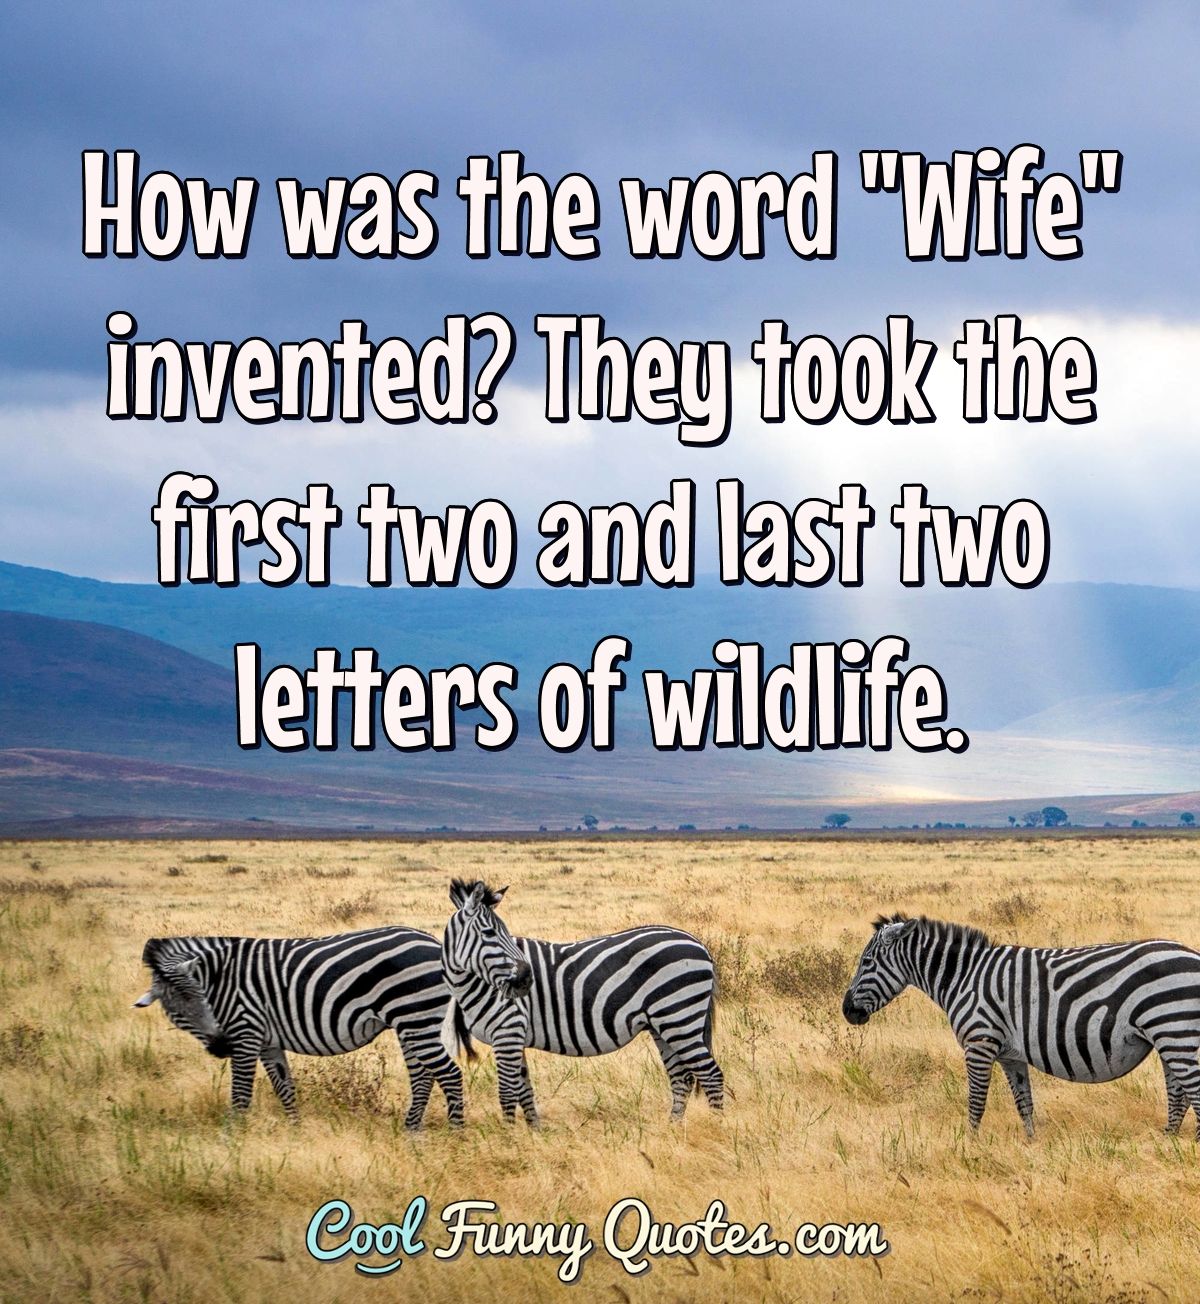 How was the word "Wife" invented? They took the first two and last two letters of wildlife. - Anonymous